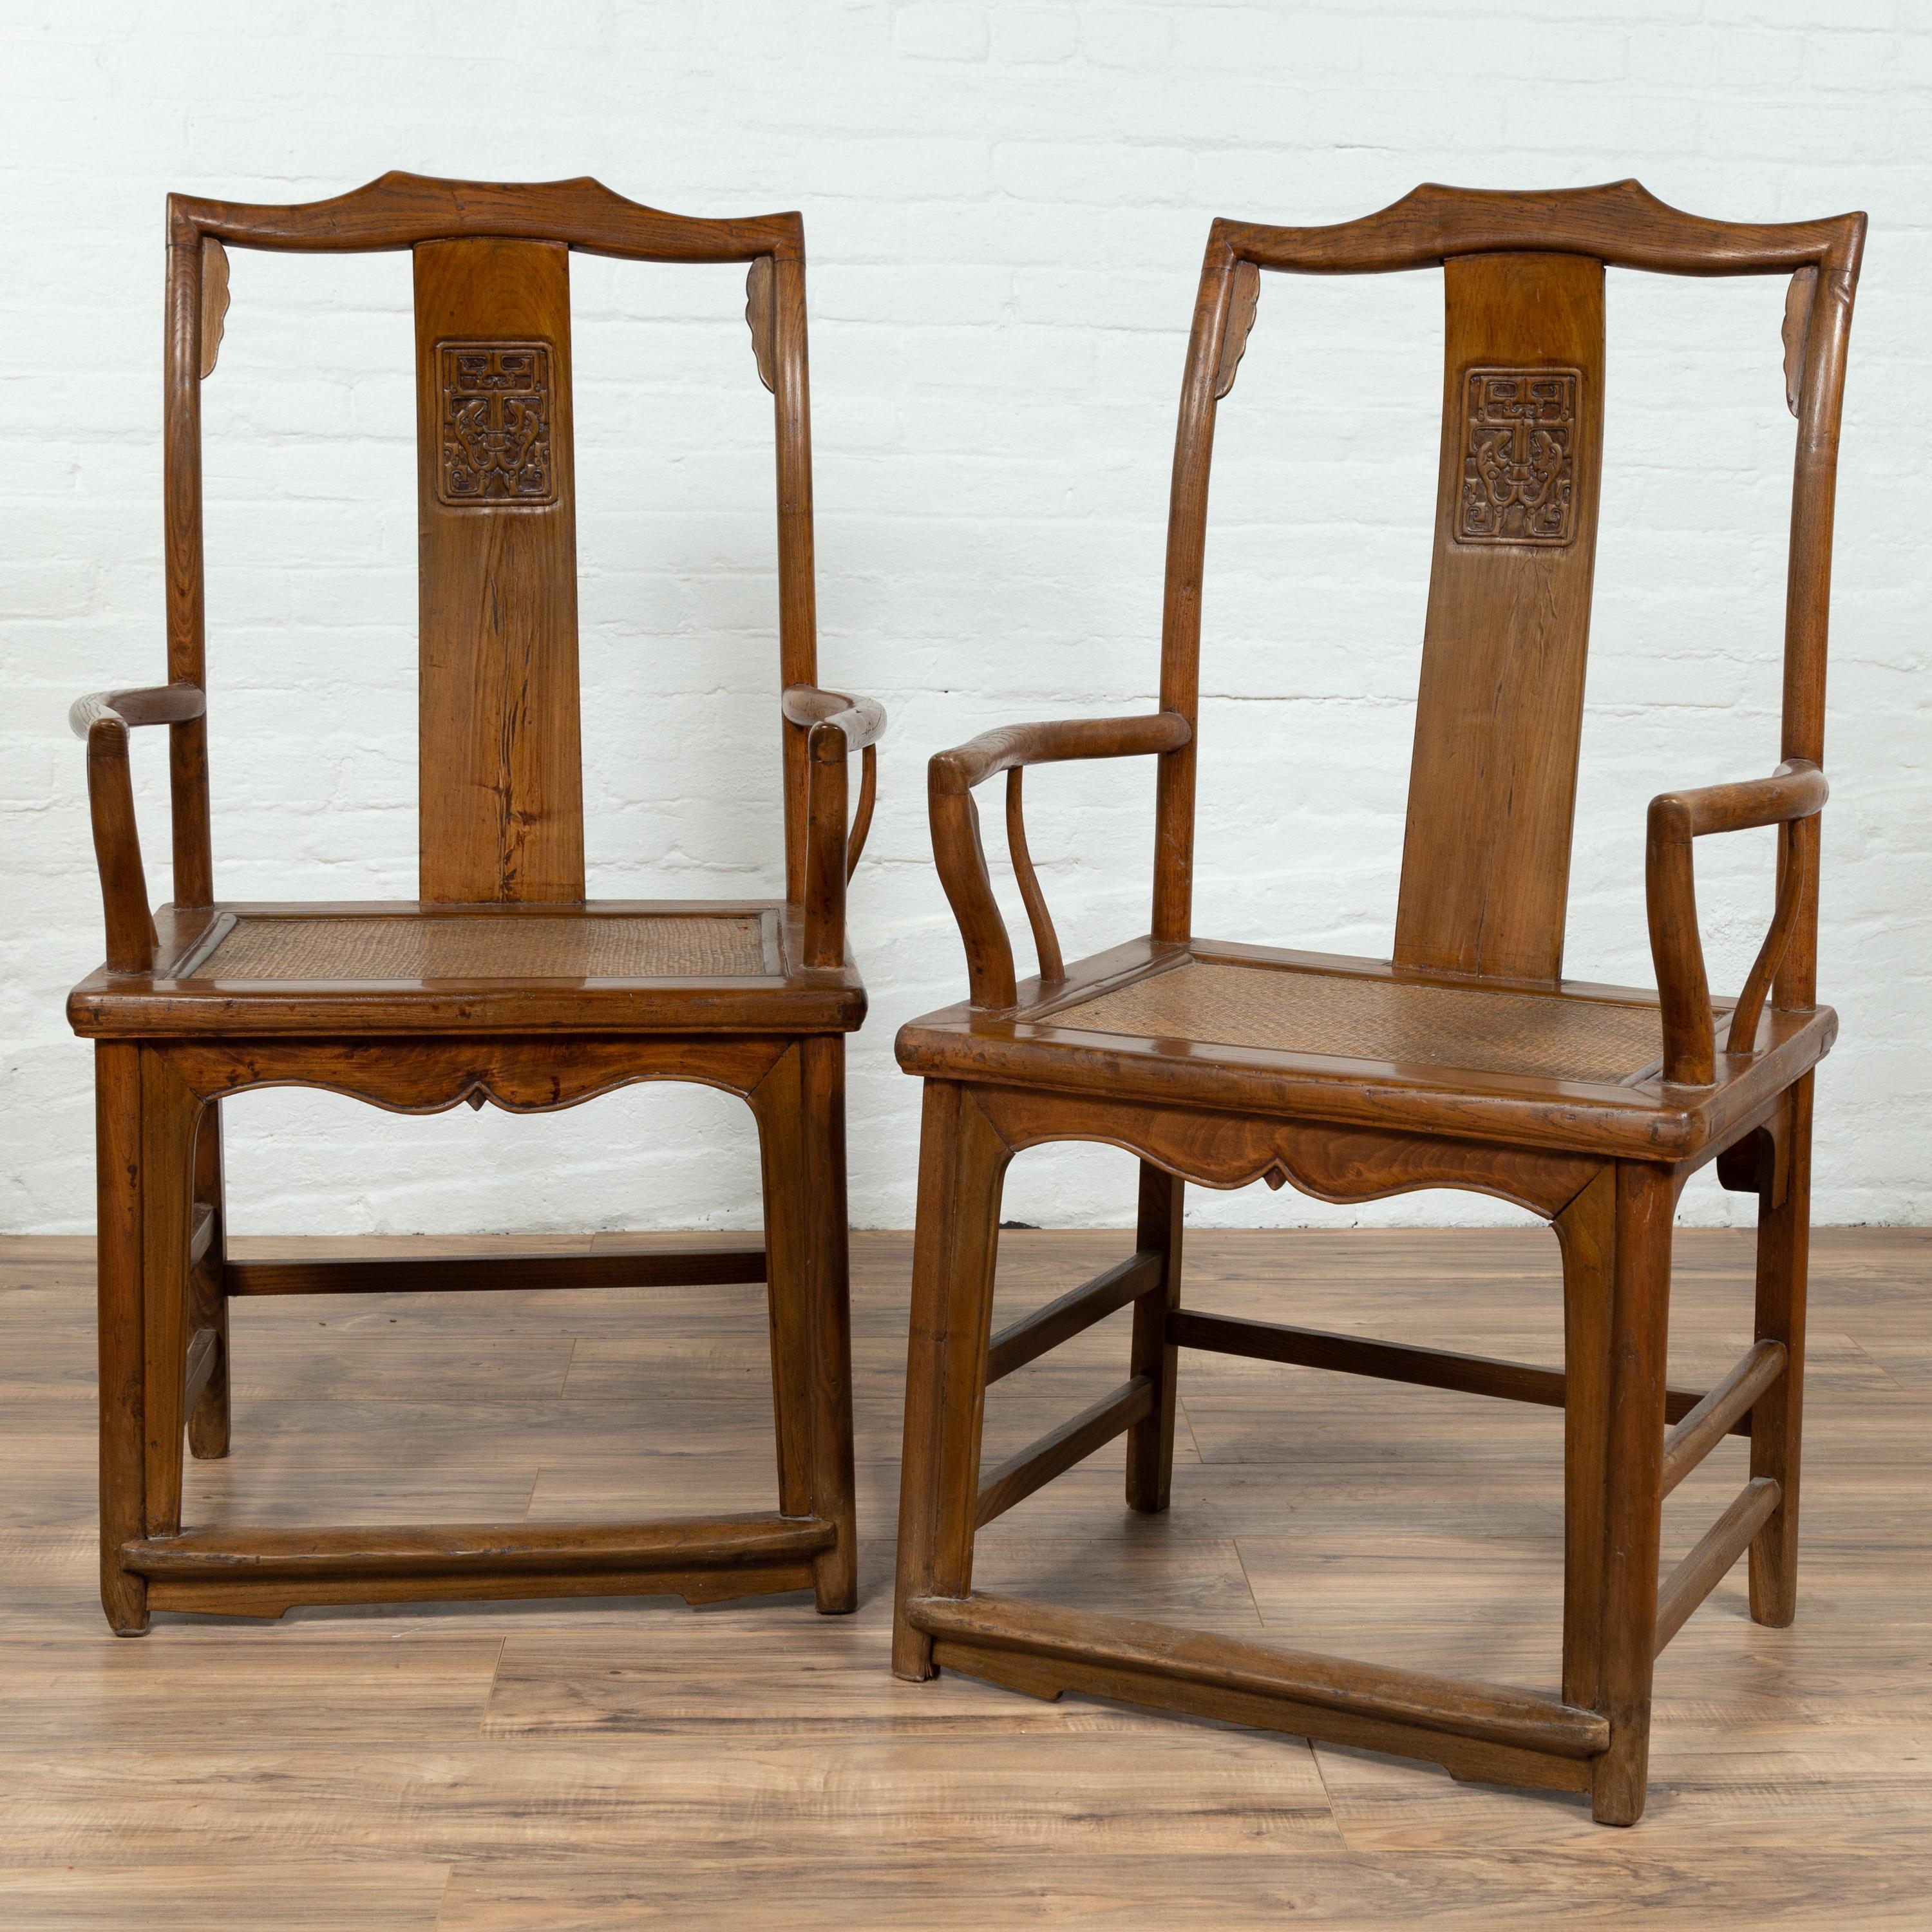 A pair of Chinese Ming Dynasty style elm scholar's chairs from the early 20th century, with unusual upper rail, carved panels on the splats, curved arms and rattan seats. Born in China during the early years of the 20th century, each of this pair of